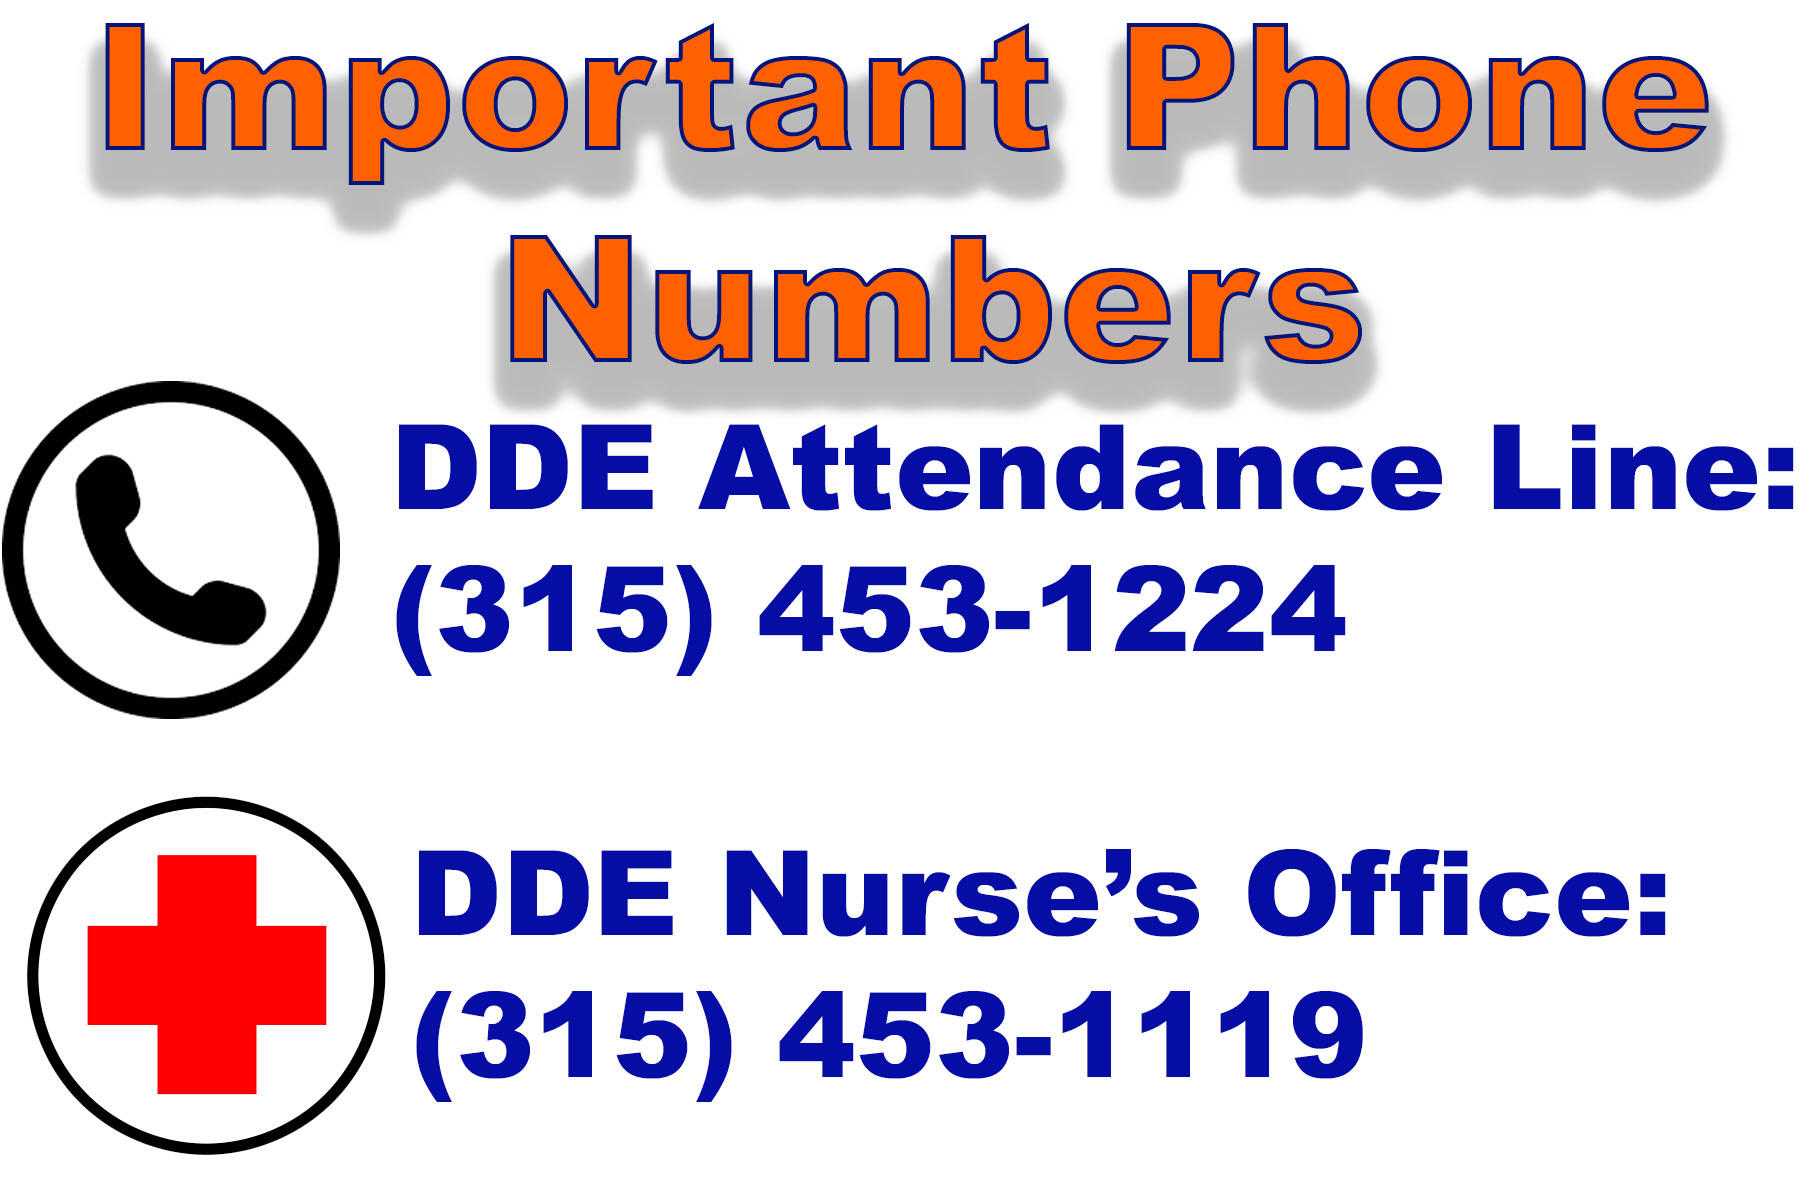 Important DDE Numbers: DDE Attendance is 315-453-1224 and DDE Nurse's Office is 315-453-1119